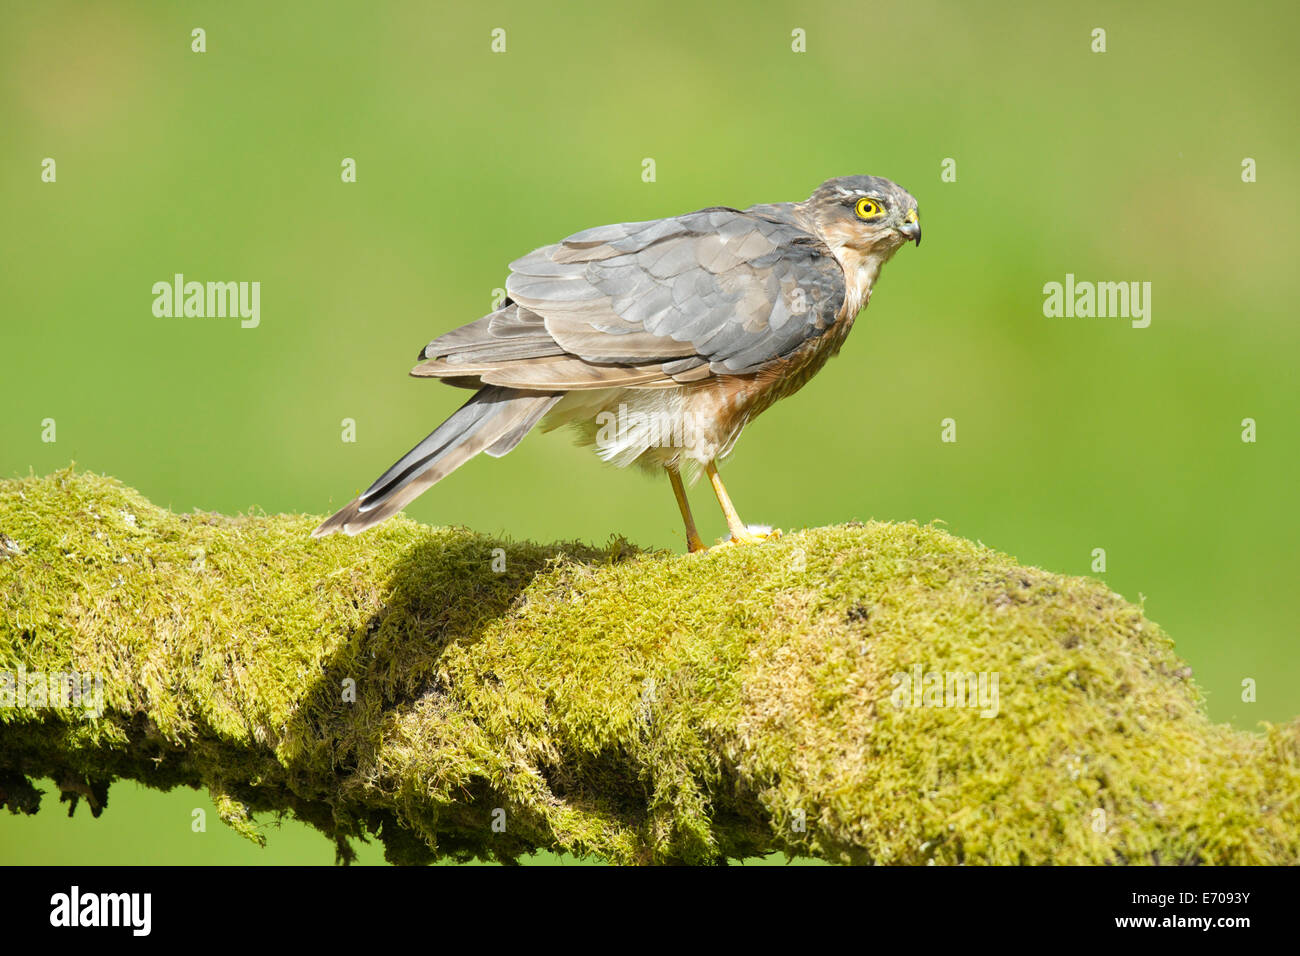 Sparrowhawk casts a wary eye in the direction of the camera as it hears the sound of the soft shutter release #3571 Stock Photo